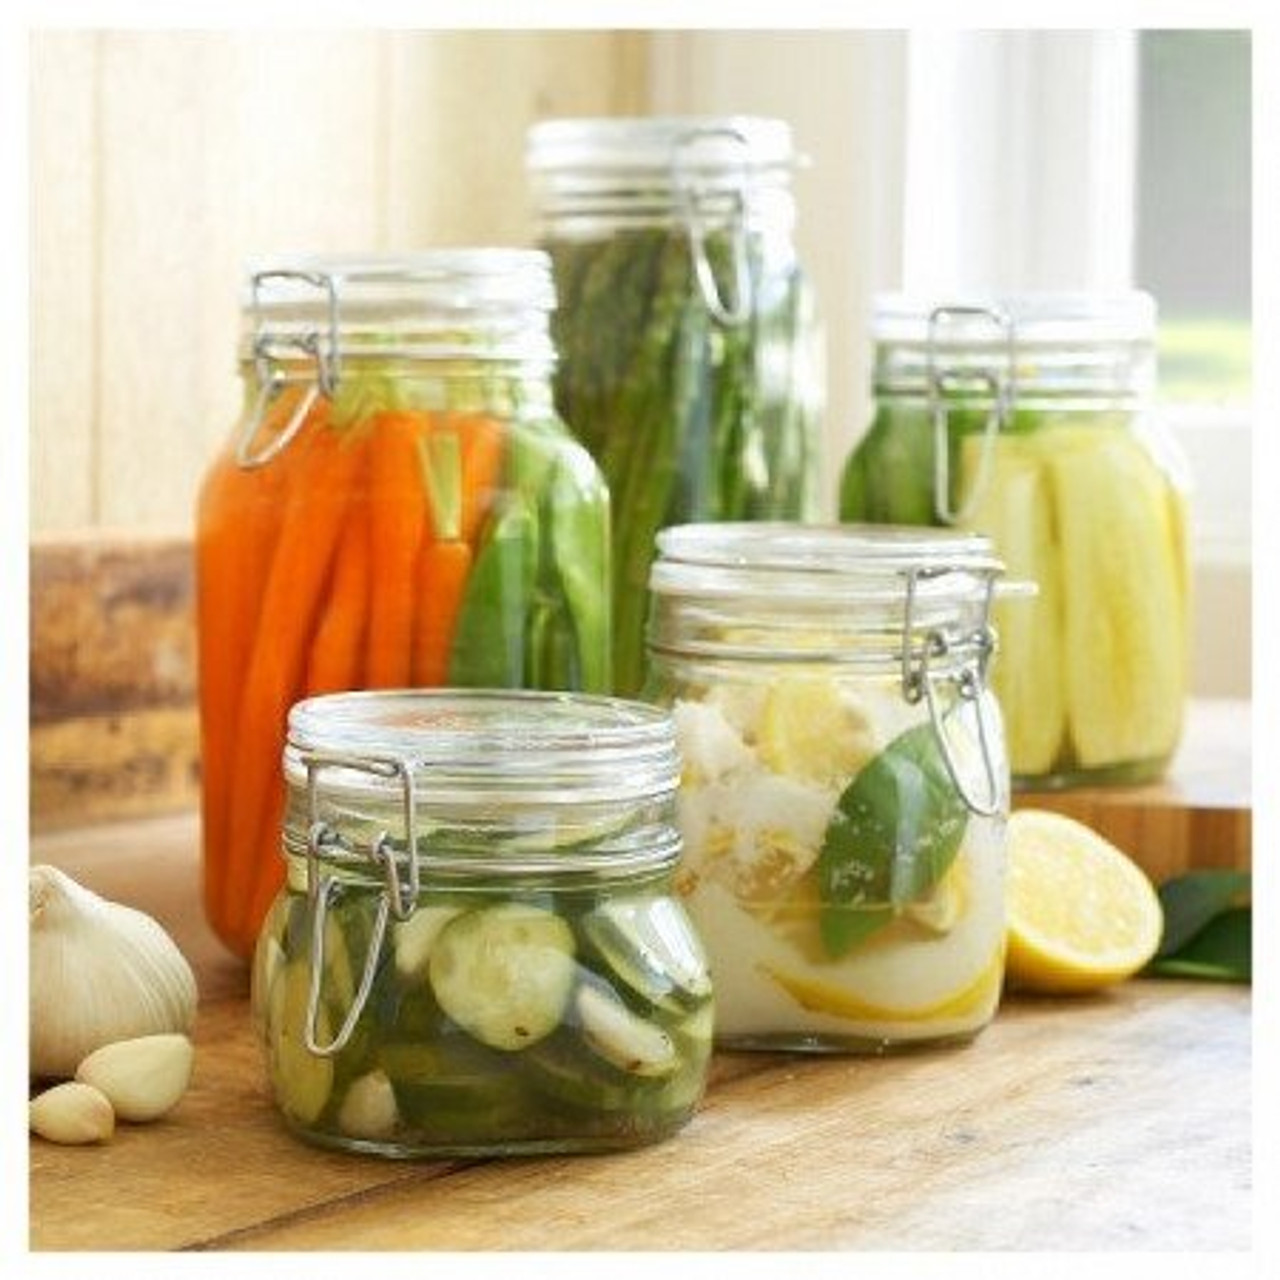 The 3L Fido Jar can store veggies in your freezer or refrigerator. 